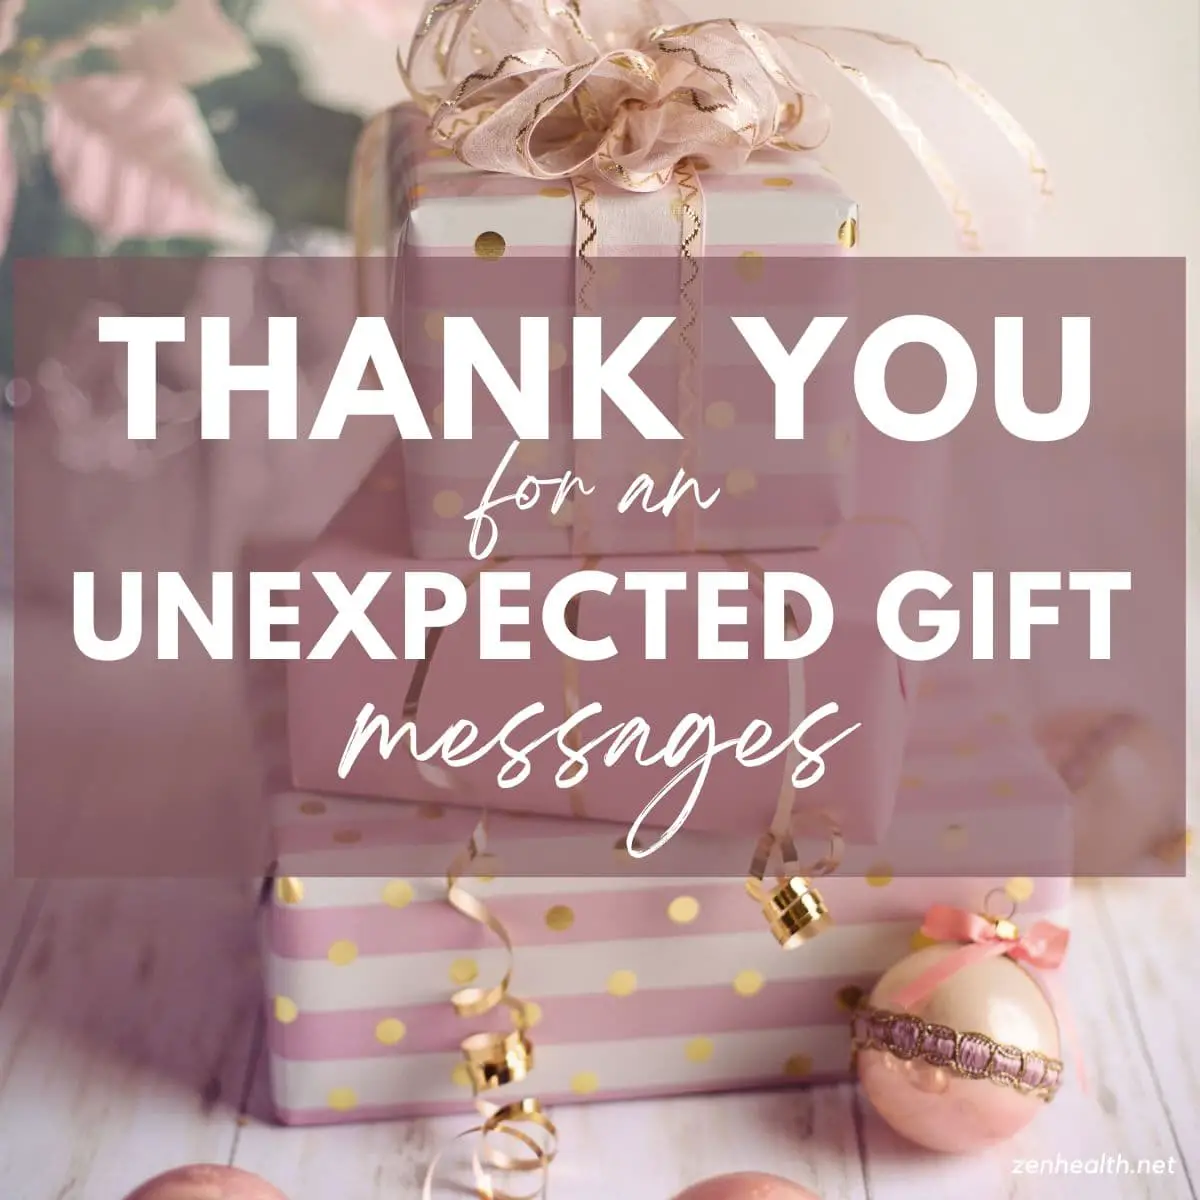 thank you for an unexpected gift messages text overlay on a photo of a stack of gifts in pick tones